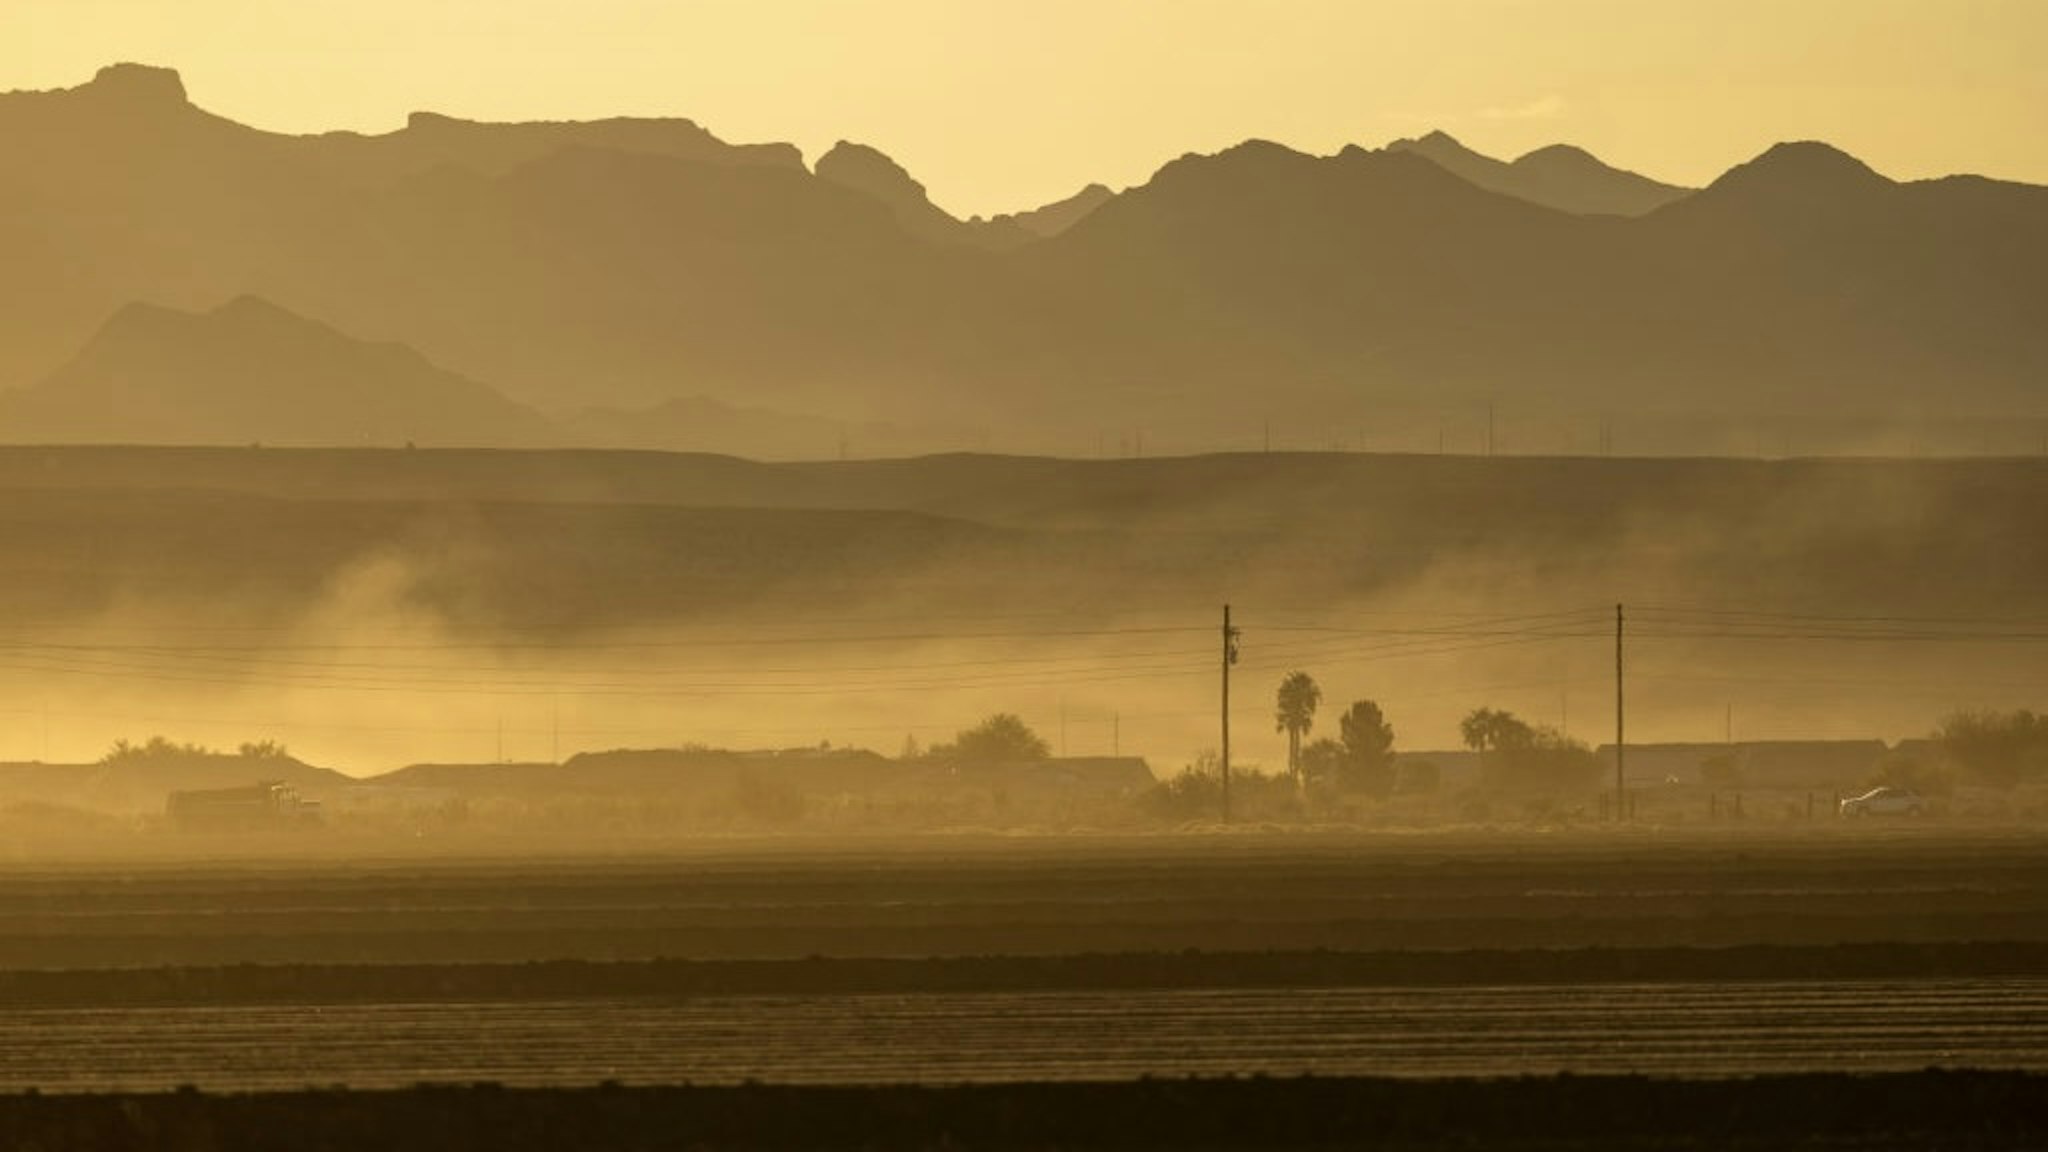 Southwest Faces Severe Drought Conditions NEEDLES, CA - SEPTEMBER 23: Farmland is seen at sunrise on the Arizona side of the Colorado River on September 23, 2022 near Needles, California. The federal government has proposed an unprecedented plan to cut back on water supplies for Arizona, Nevada and California, where millions of people rely on its water and power, as climate change-driven drought continues to lower water levels at the biggest reservoirs in the nation, lakes Mead and Powell, to historic low capacities. (Photo by David McNew/Getty Images) David McNew / Contributor